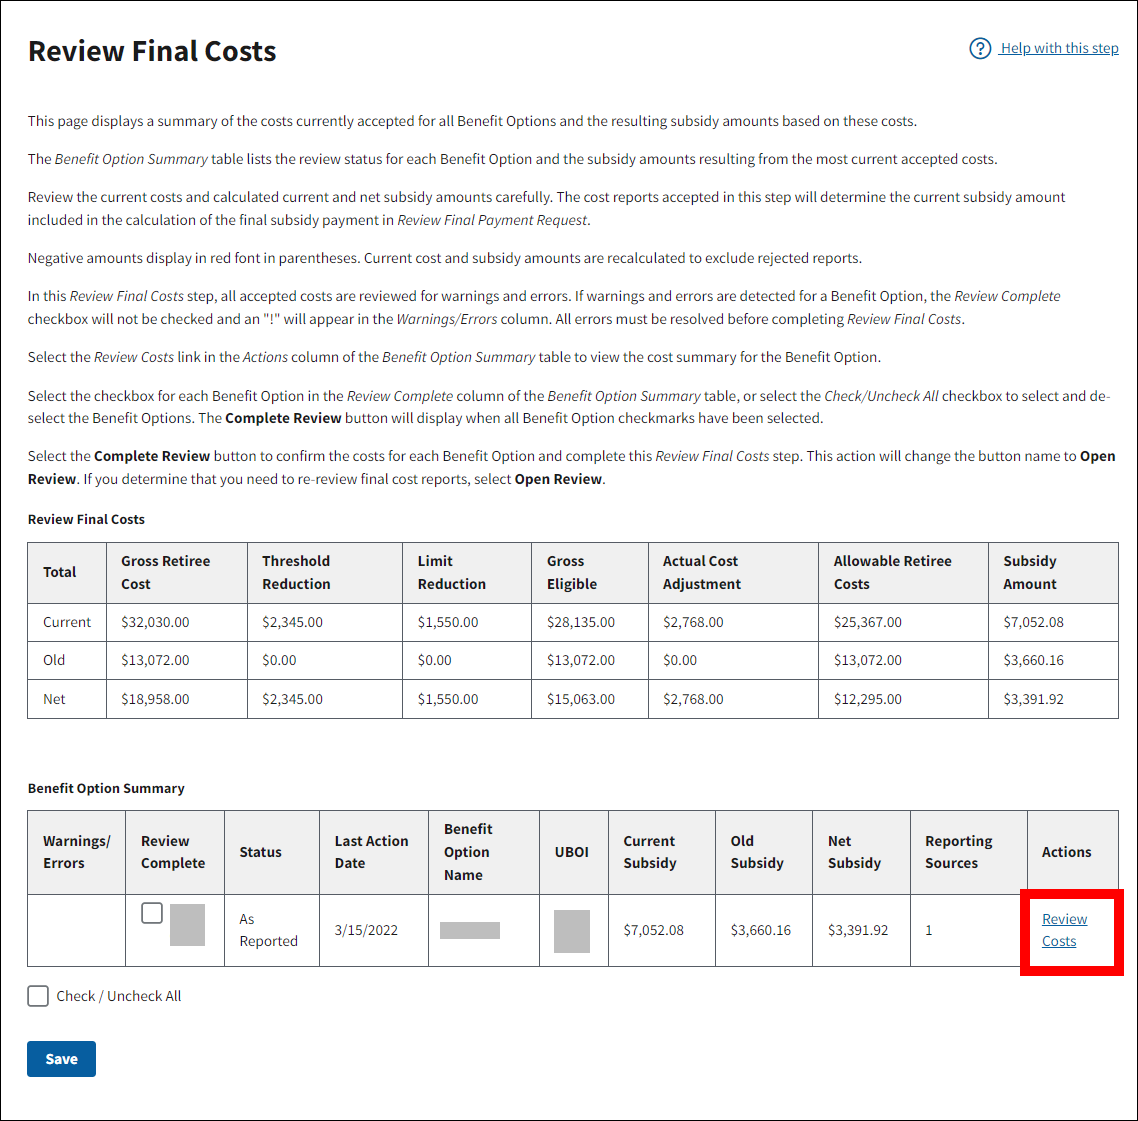 Review Final Costs page with sample data. Review Costs link is highlighted.